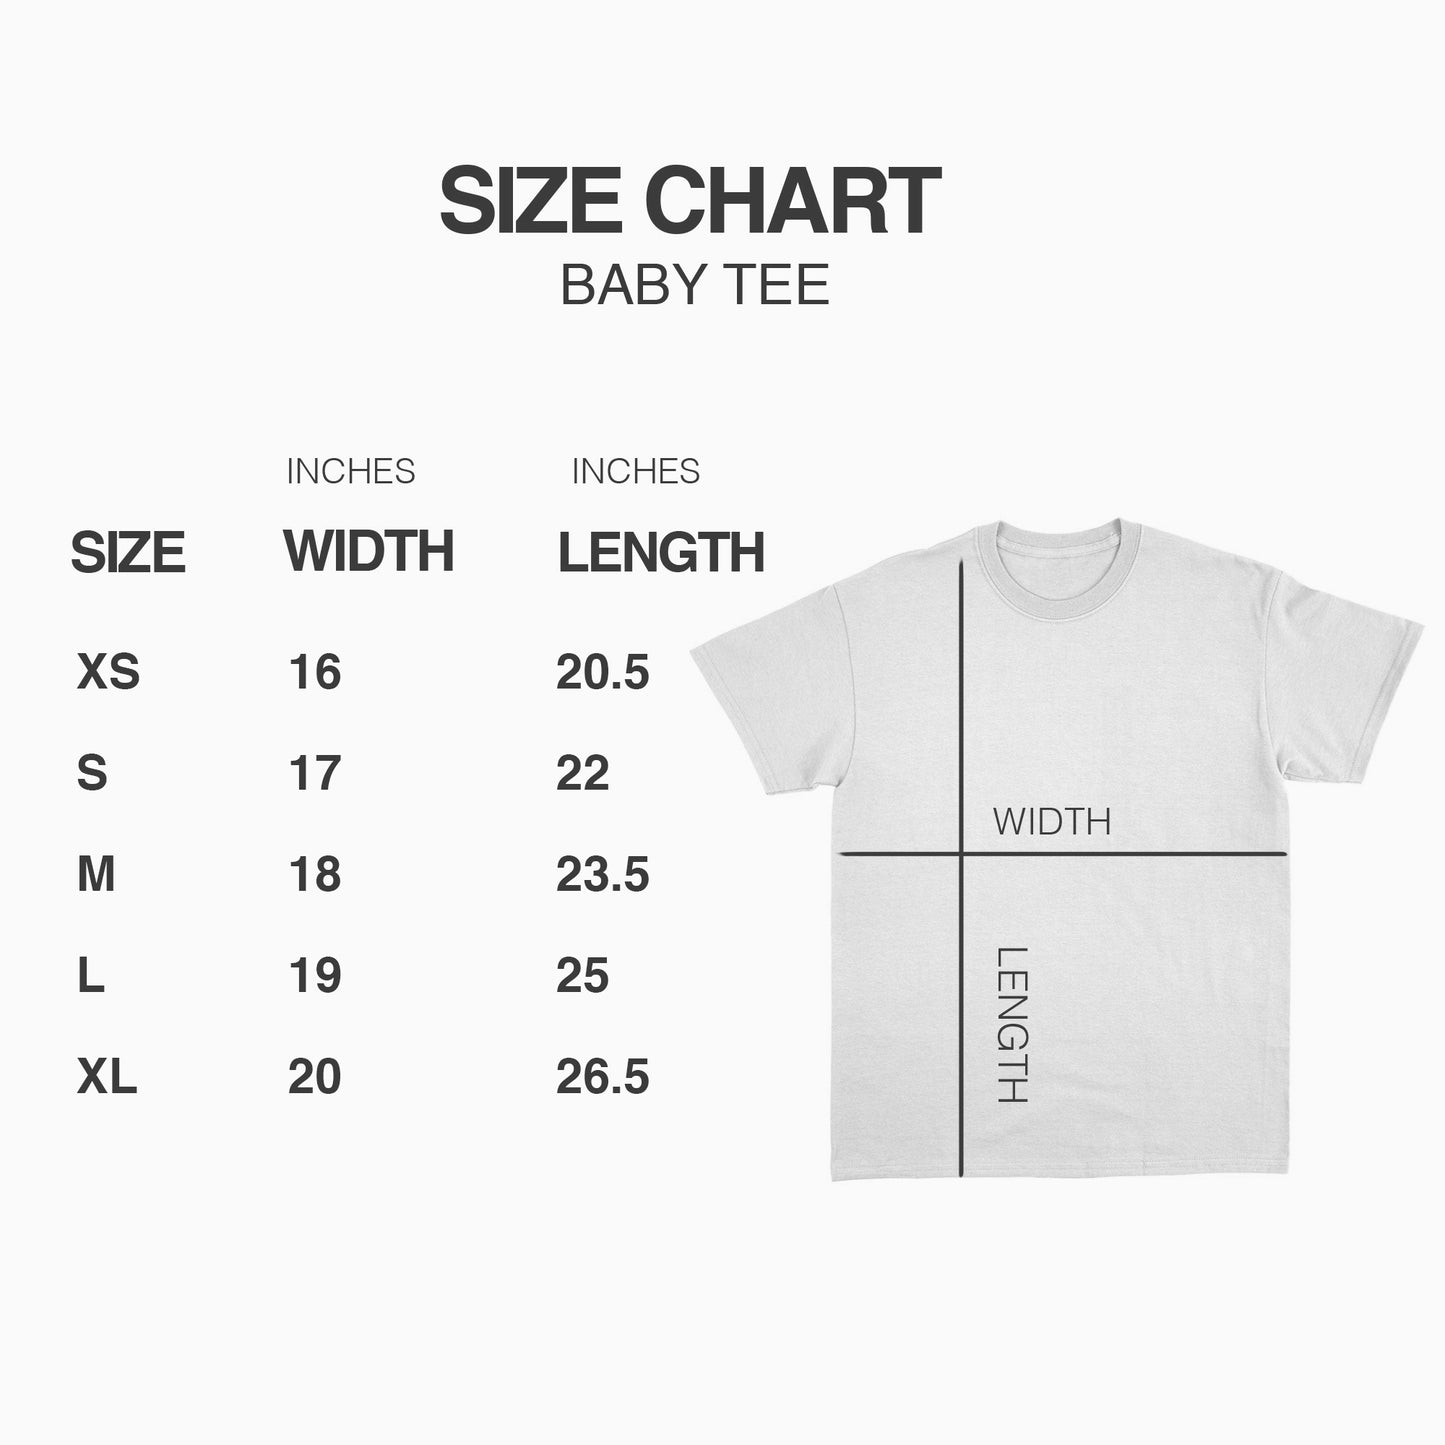 CALL IN THICC BABY TEE